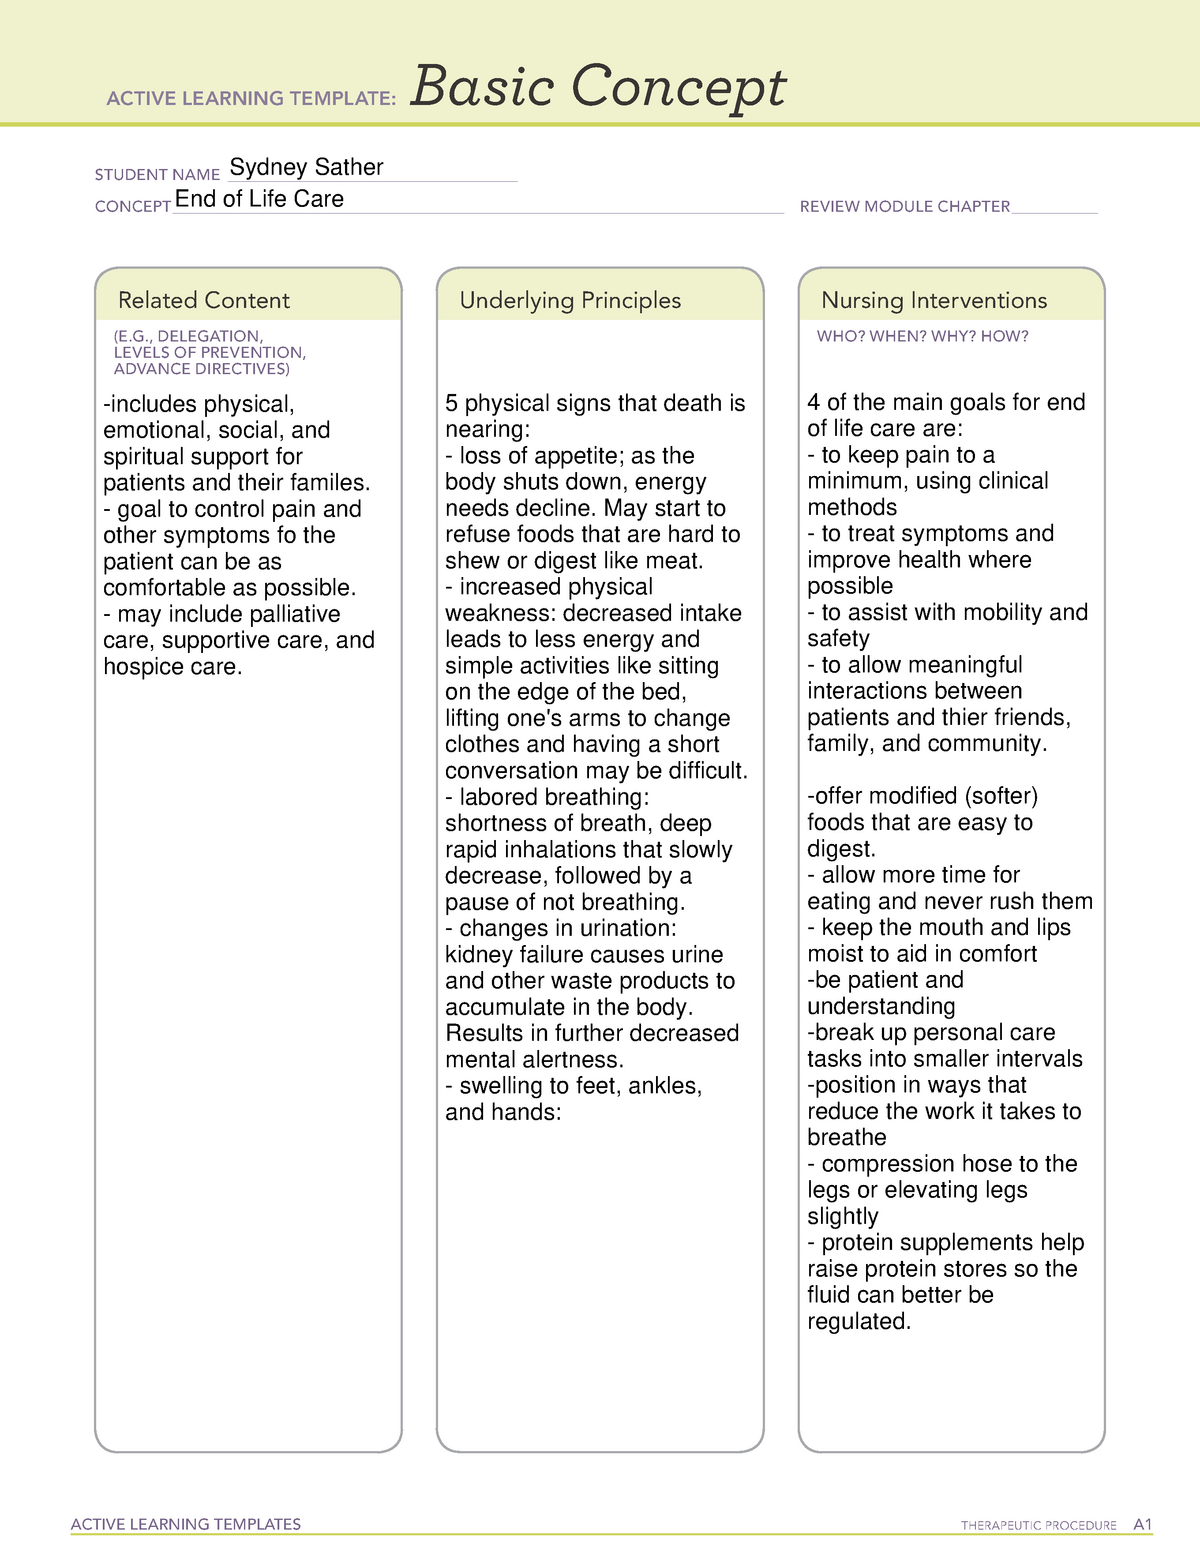 End of Life End of Life.pdf ACTIVE LEARNING TEMPLATES THERAPEUTIC